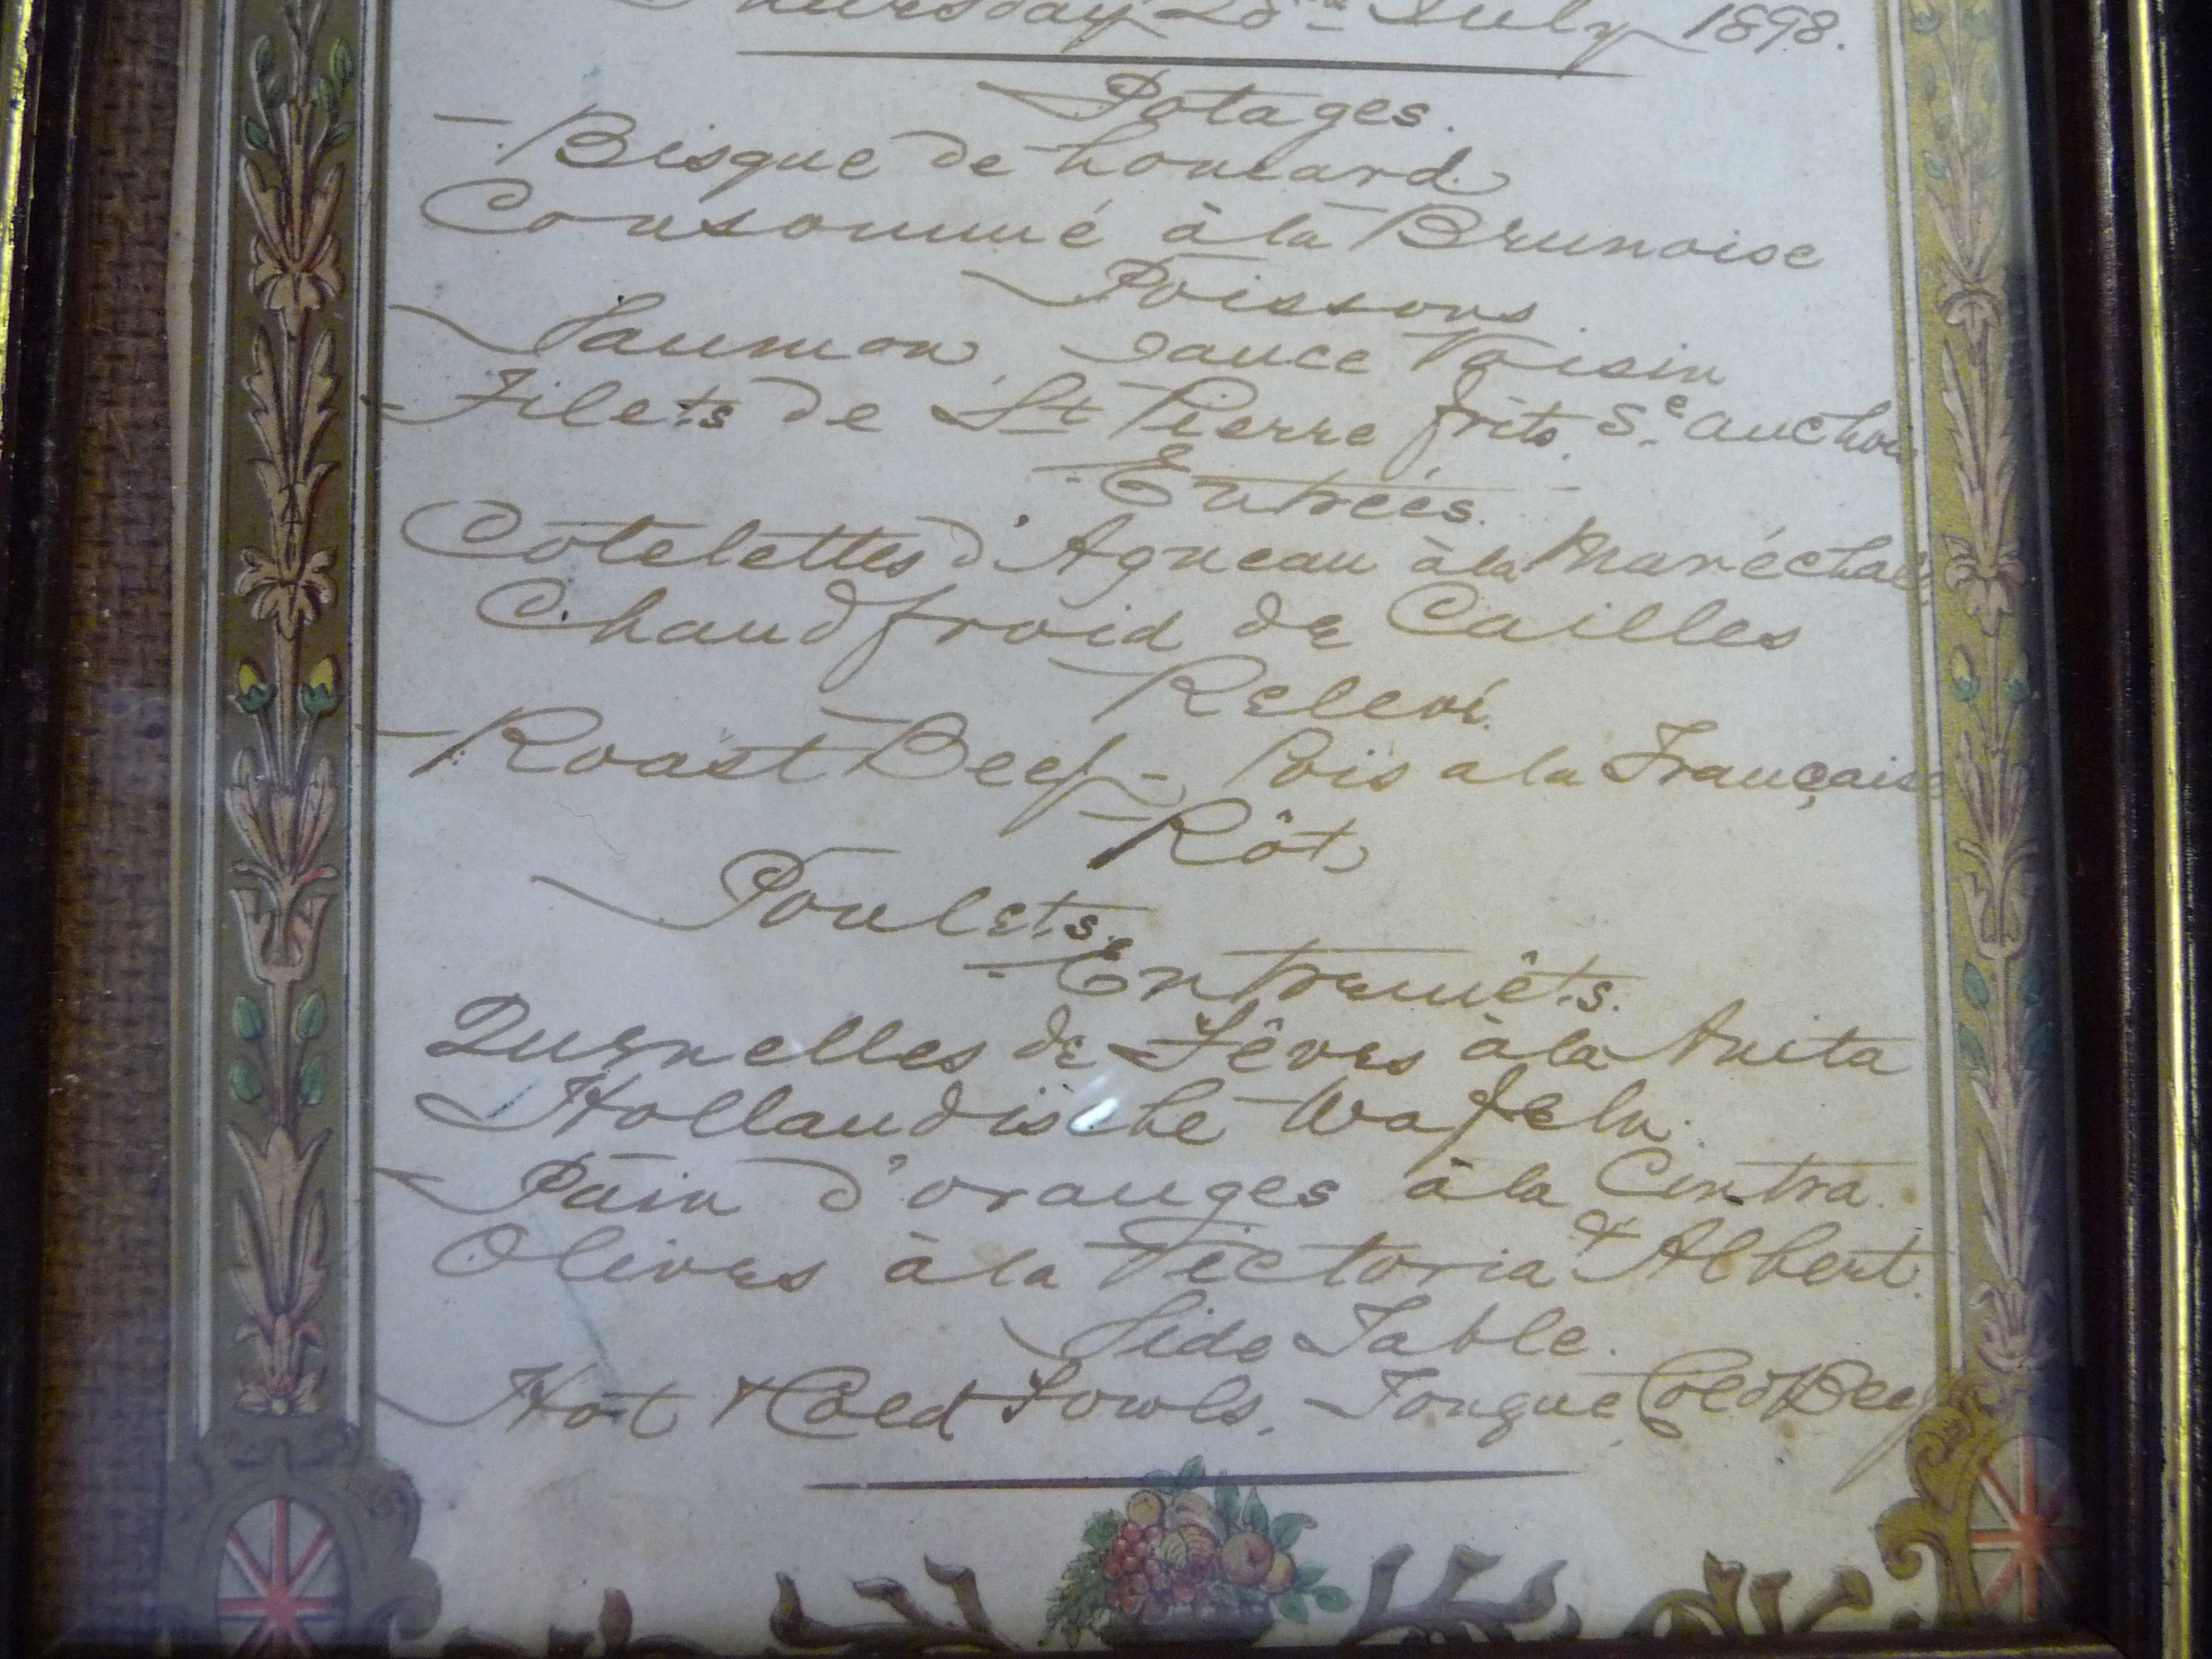 A handwritten menu for Her Majesty's dinner at Osborne House on Thursday 28th July 1898 7'' x 5'' - Image 6 of 6